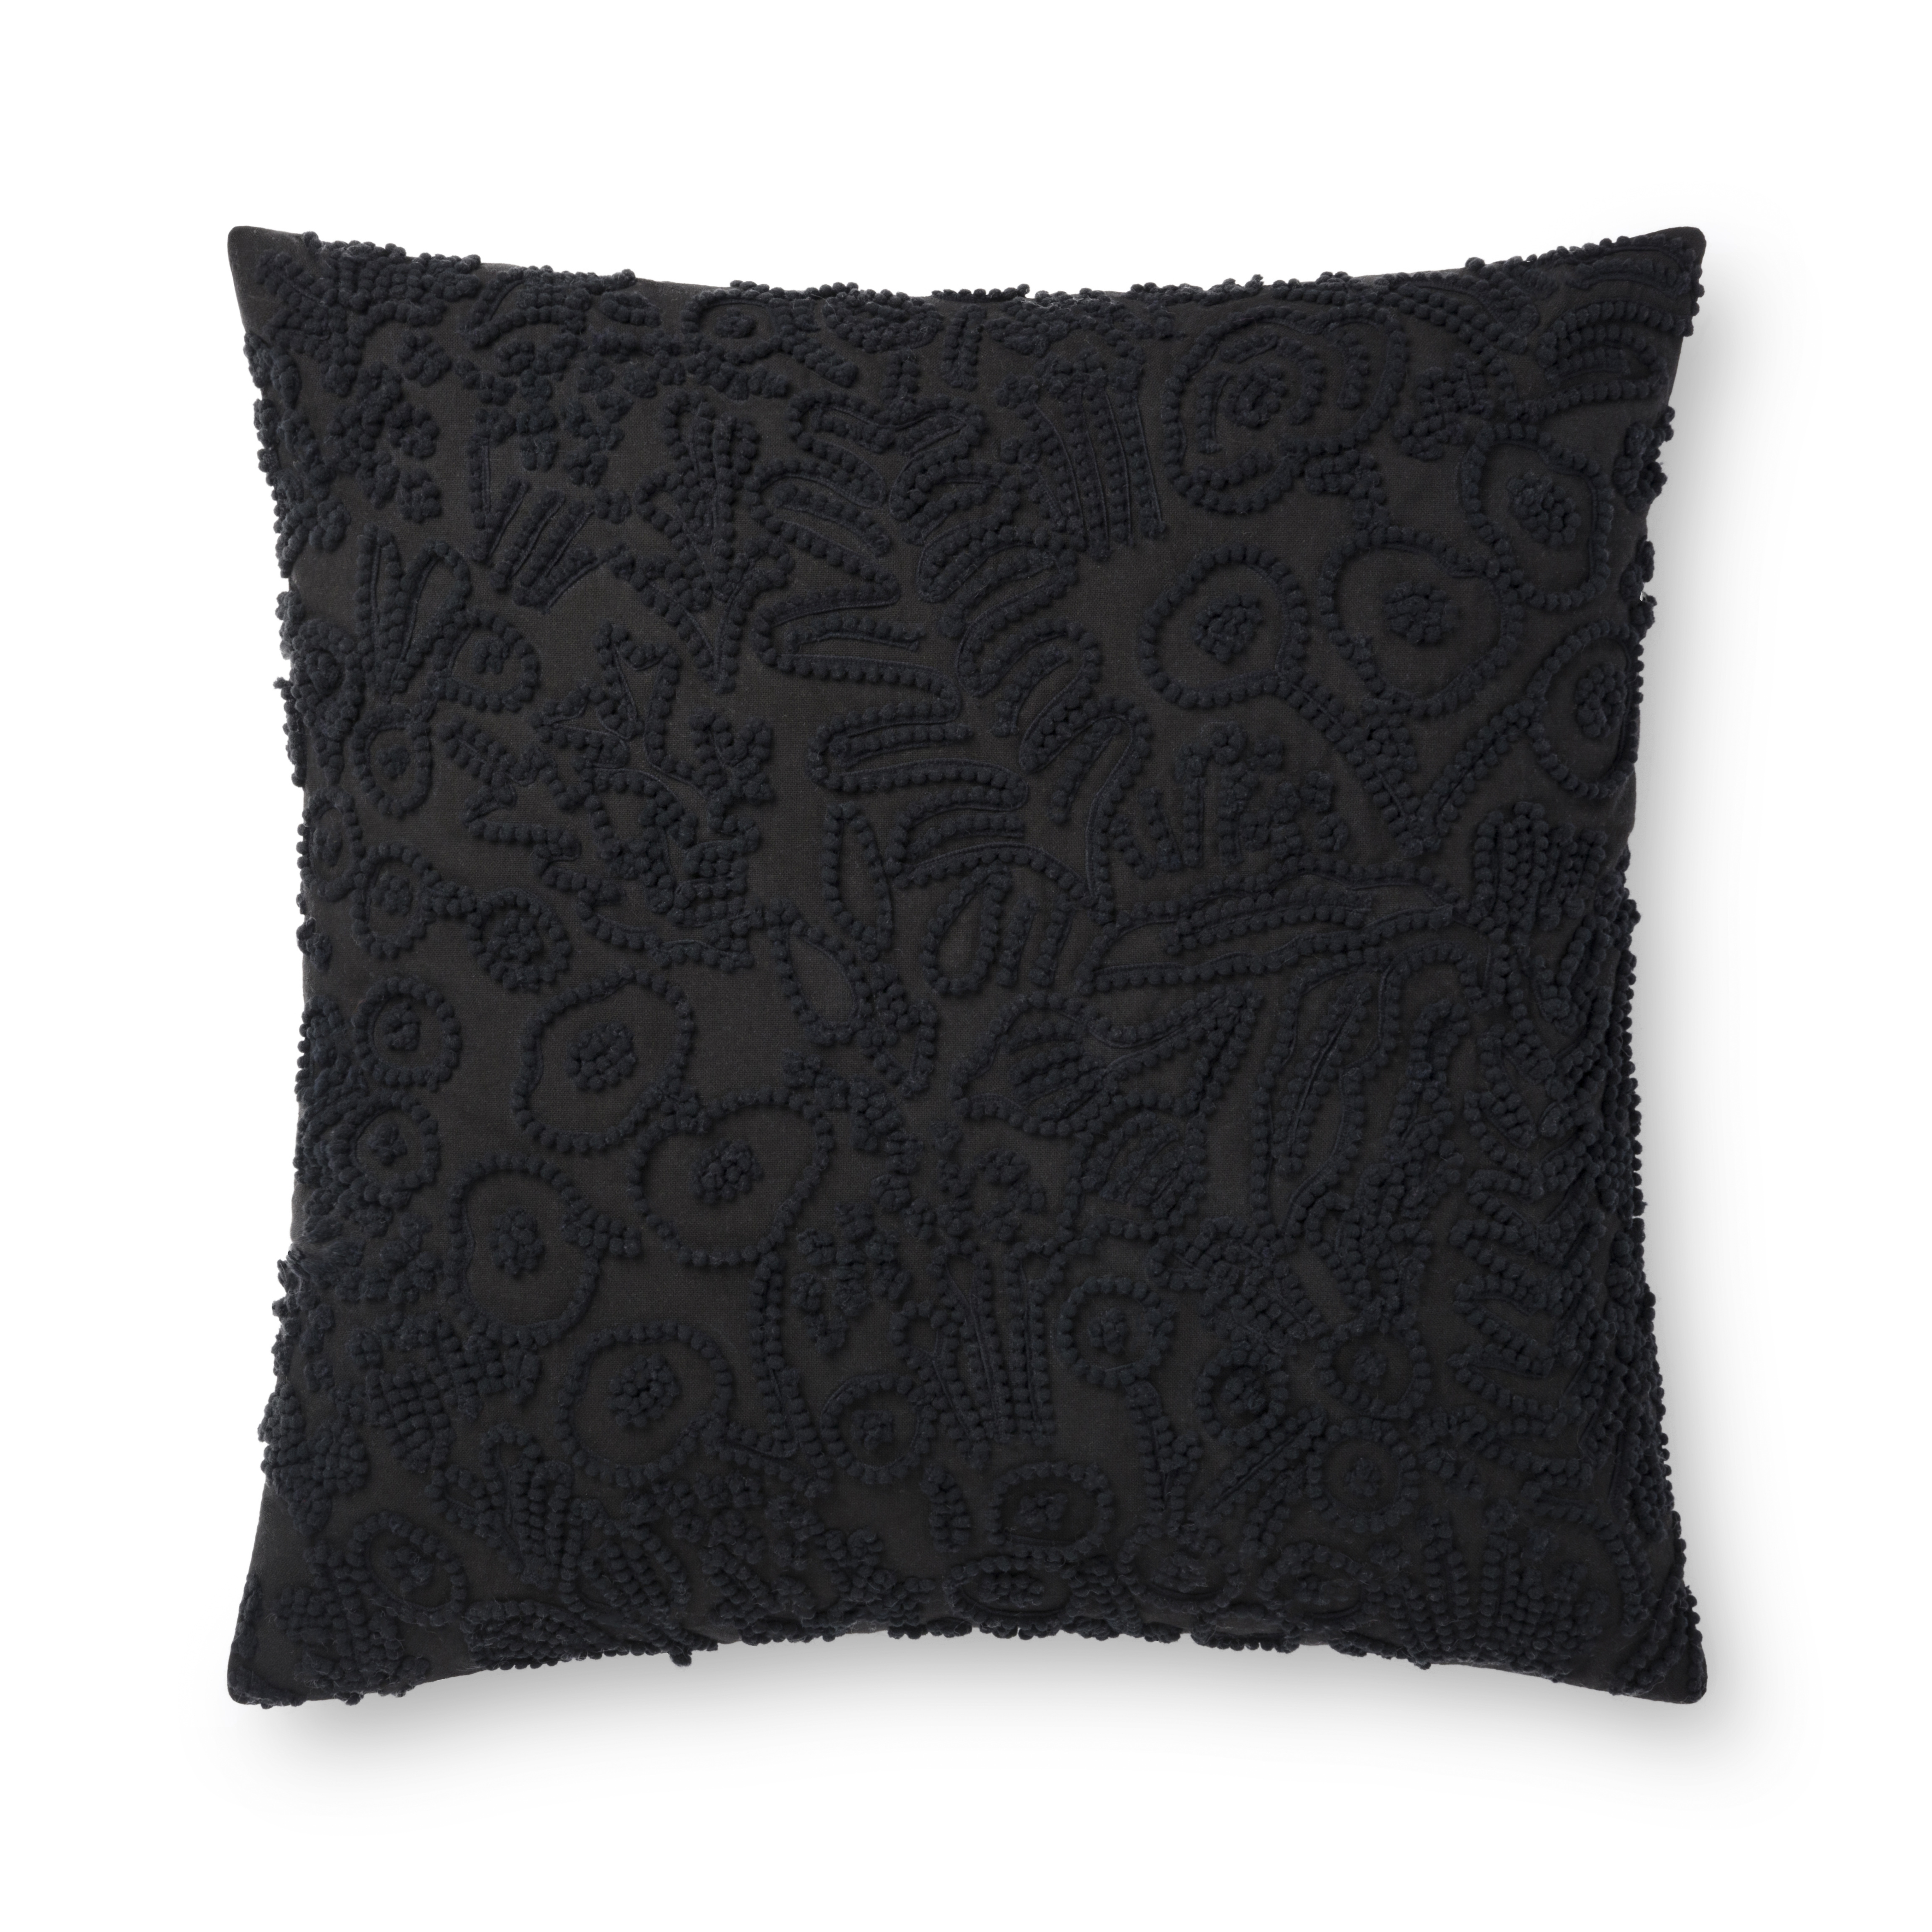 Rifle Paper Co. x Loloi PILLOWS P6030 BLACK 22" x 22" Cover Only - Rifle Paper Co. x Loloi